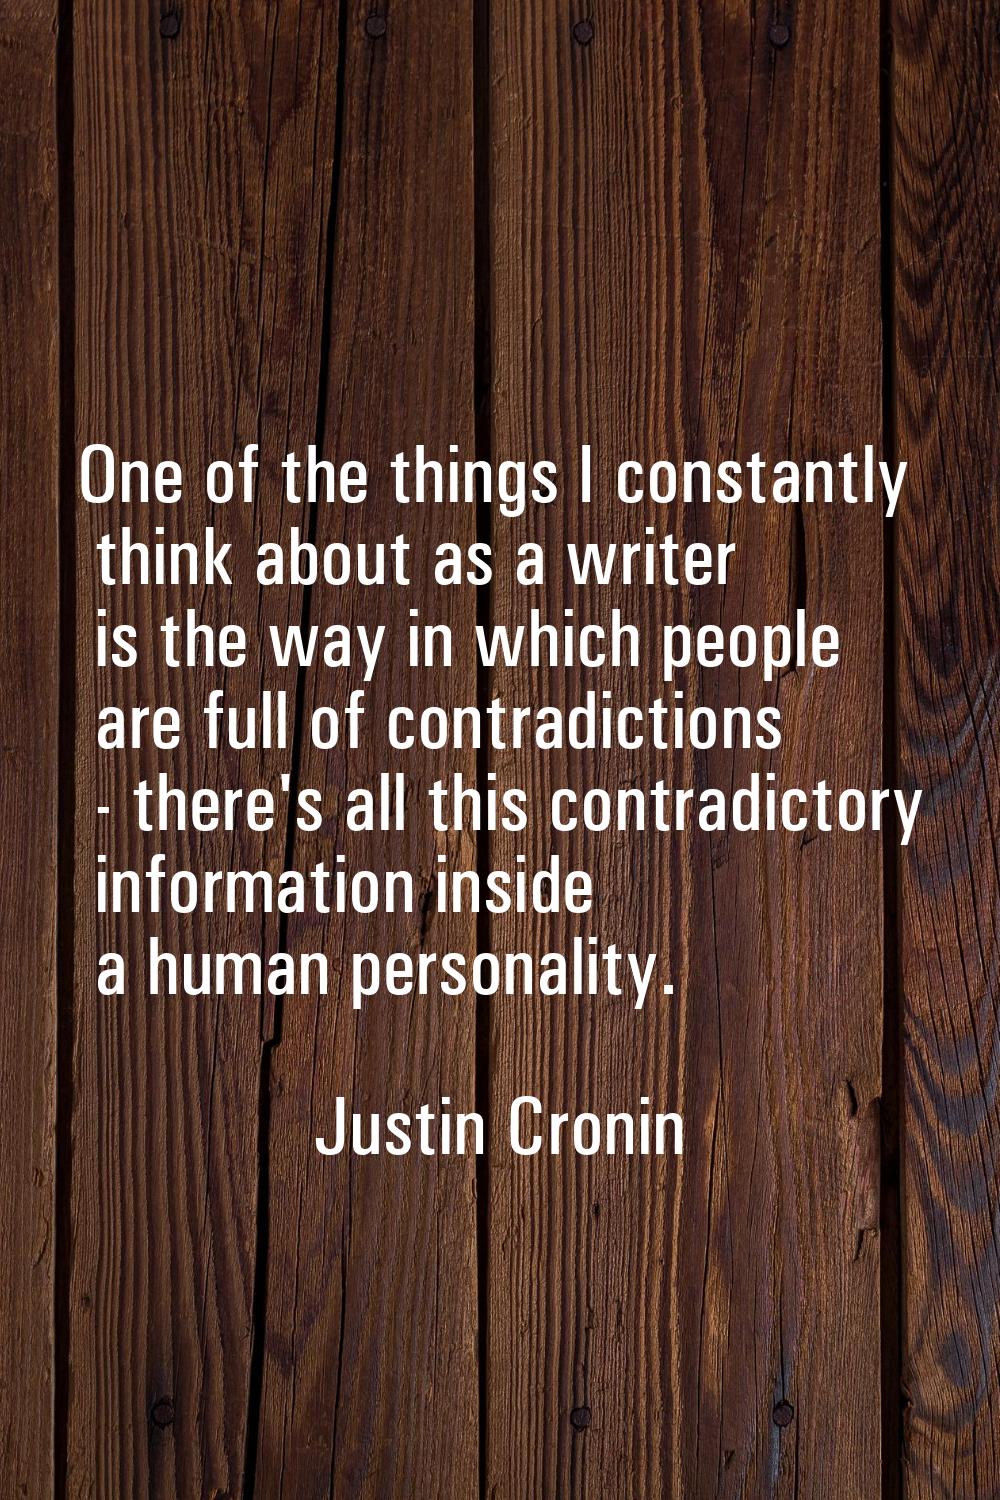 One of the things I constantly think about as a writer is the way in which people are full of contr